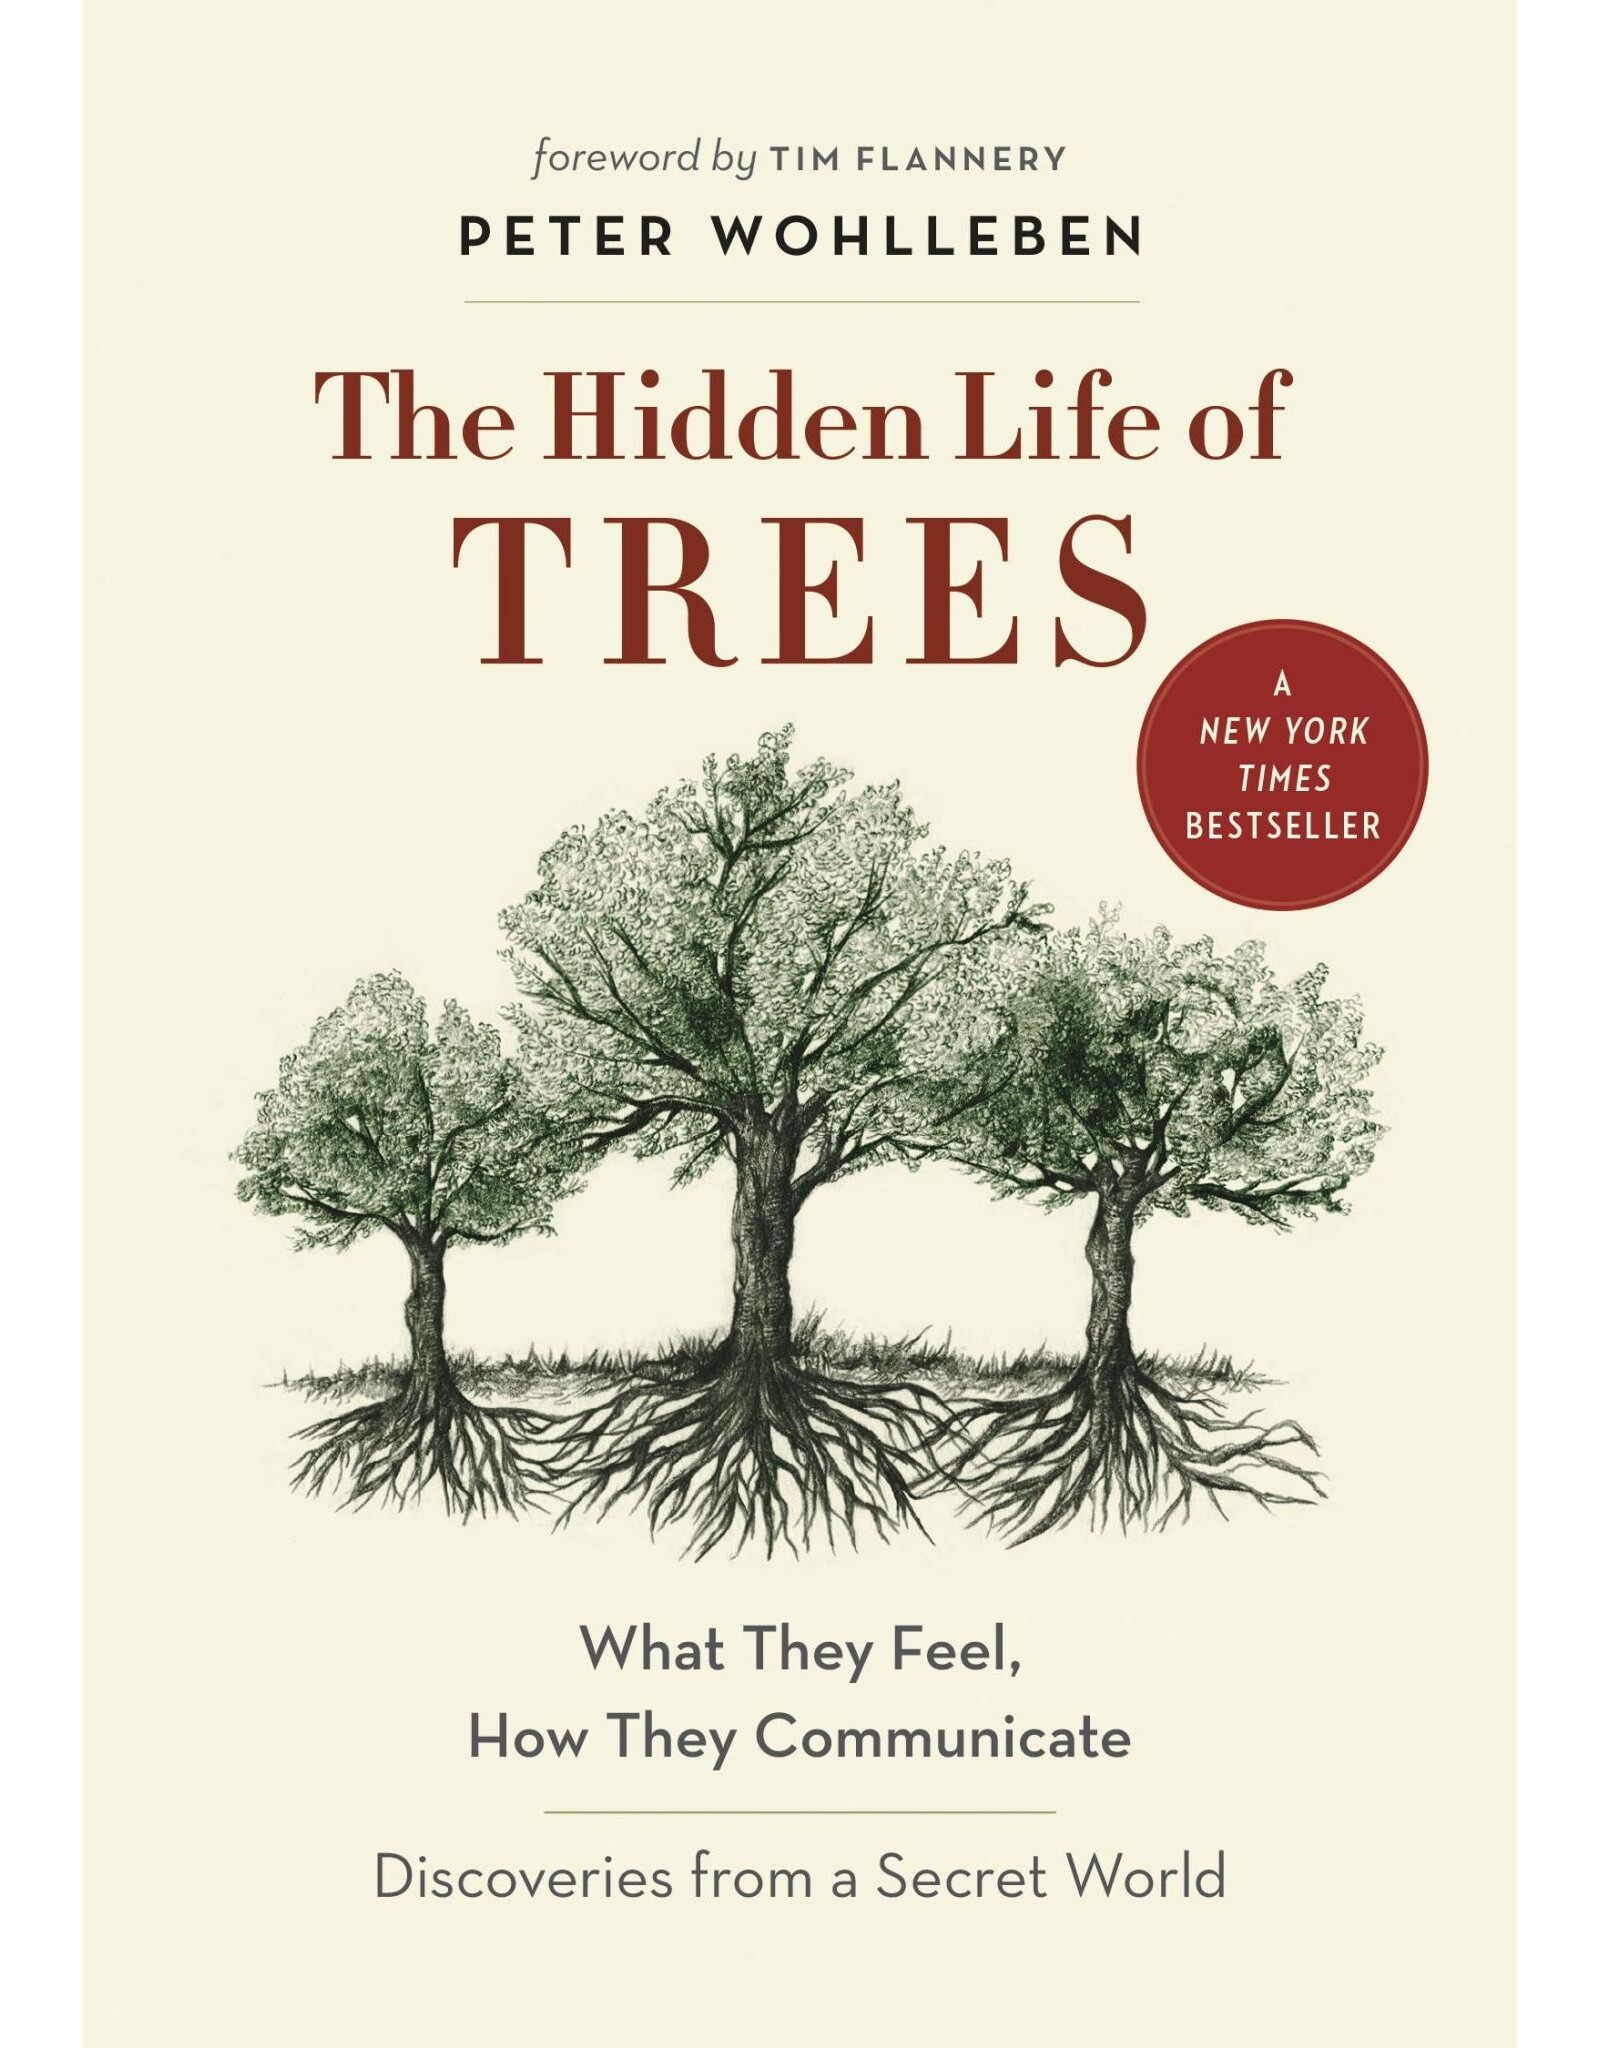 The Hidden Life of Trees